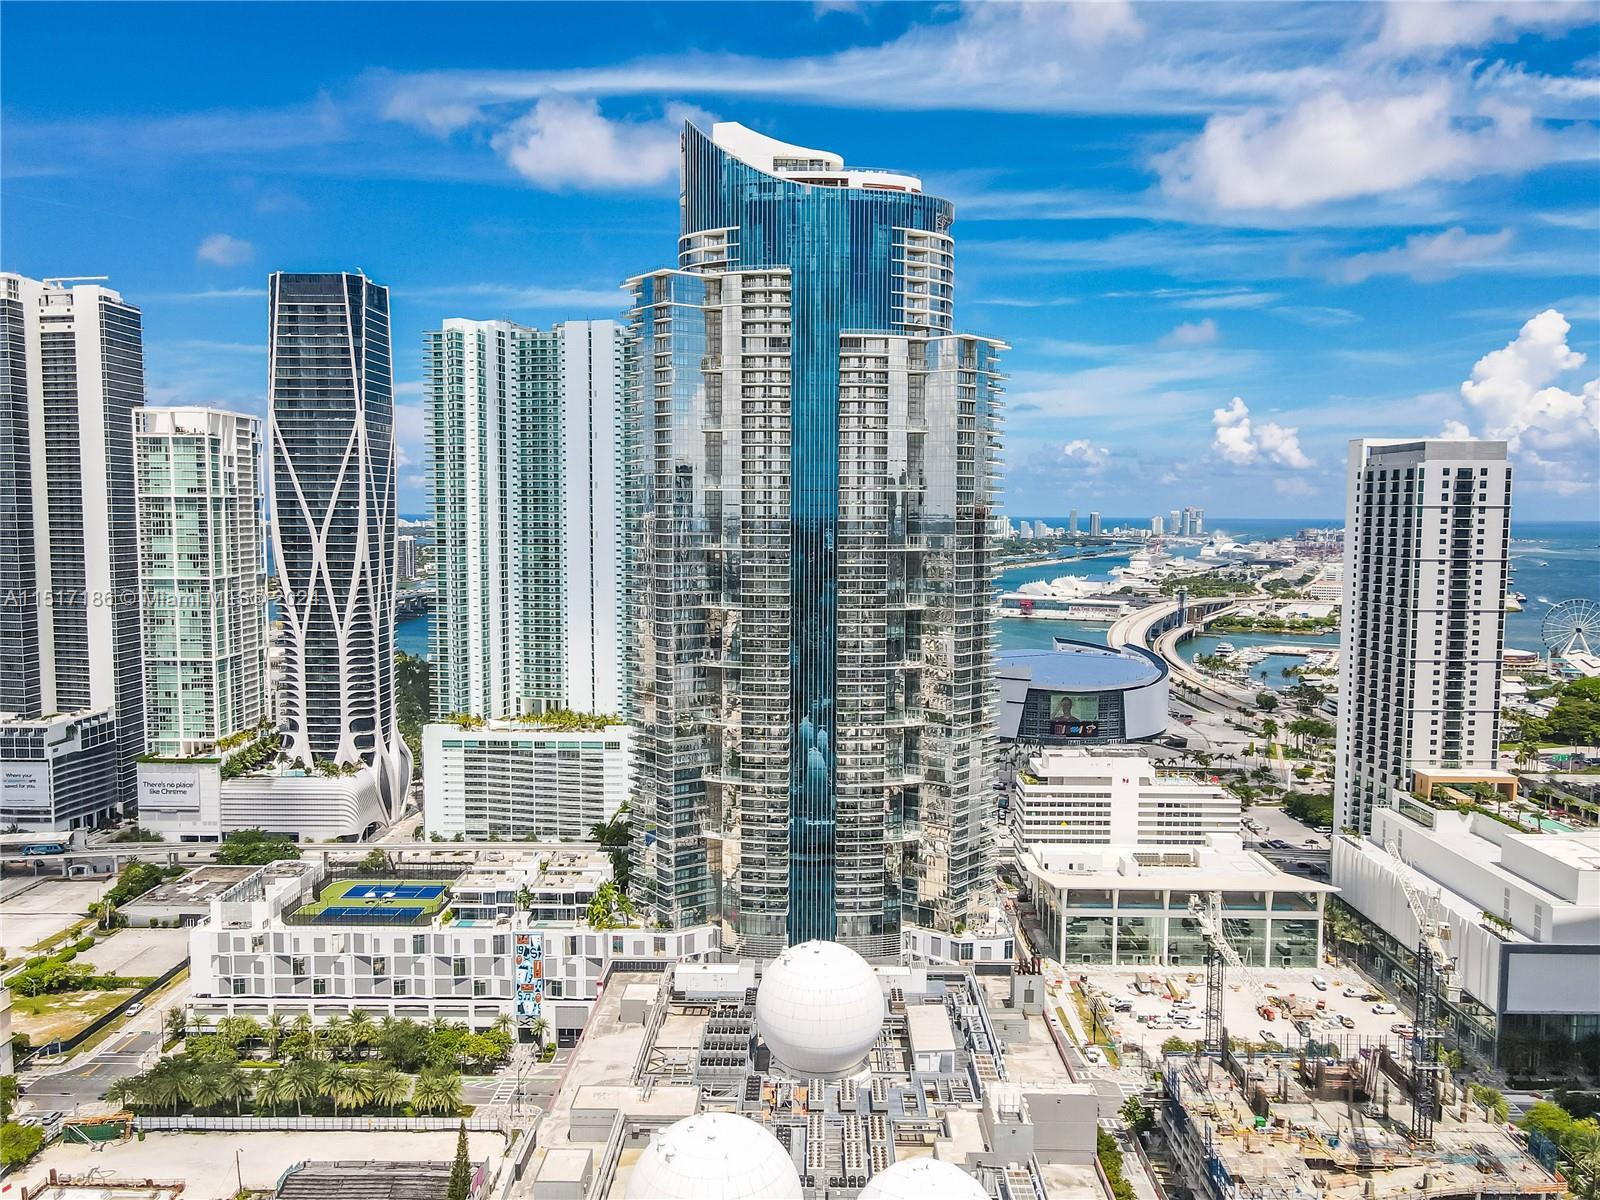 Welcome to urban luxury living at its finest in The Paramount, Miami. This stunning residence offers